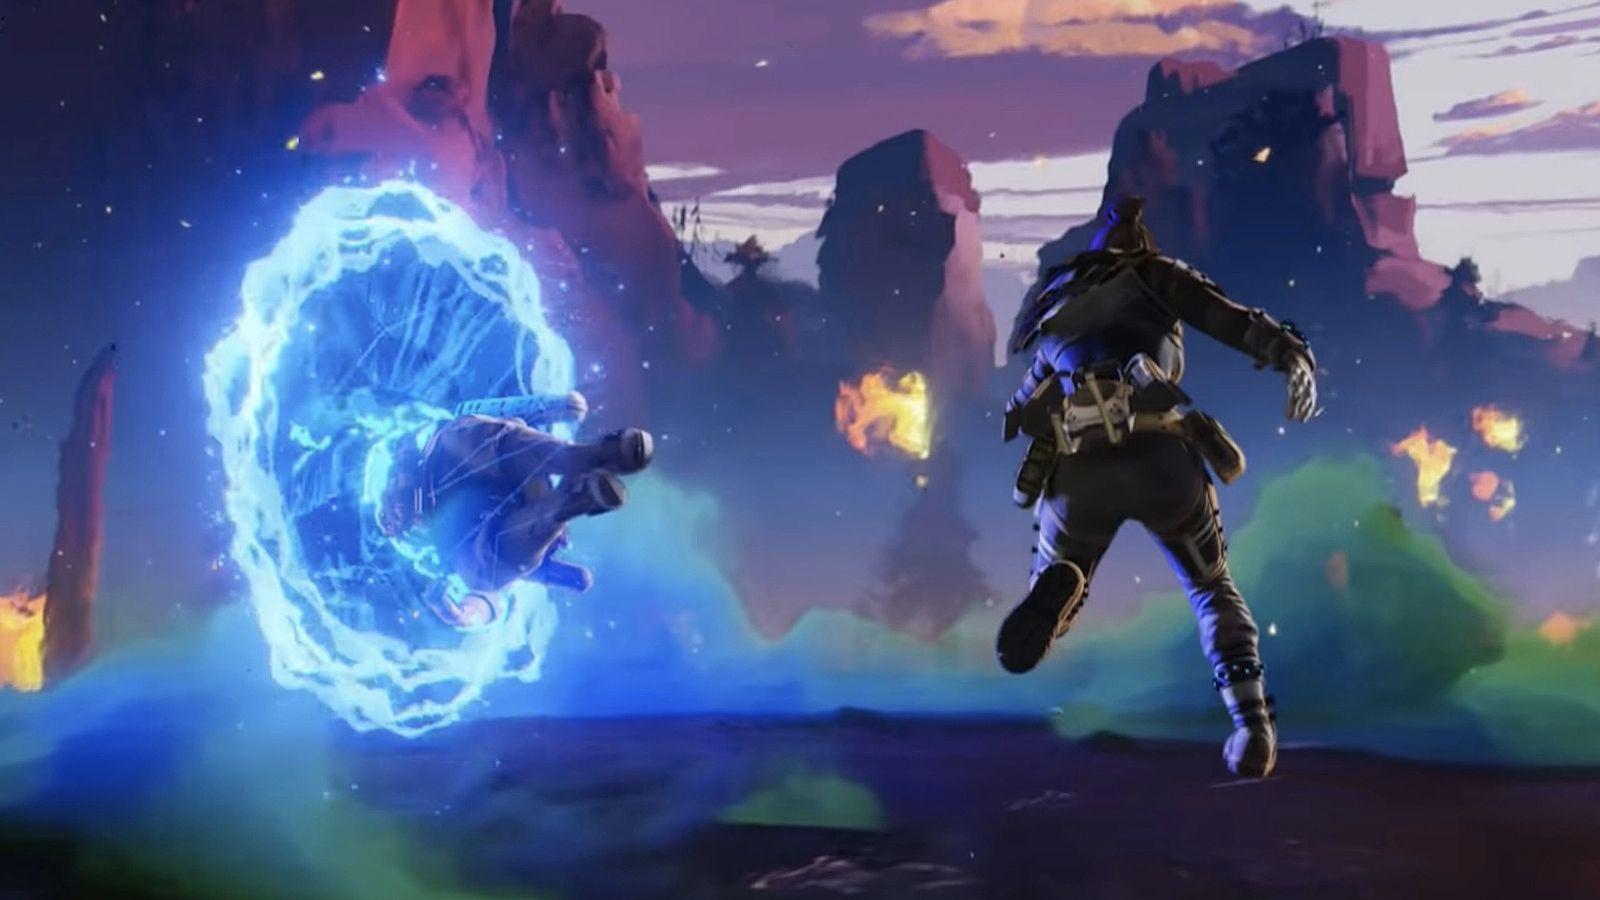 Wraith using her ultimate ability in Apex Legends.